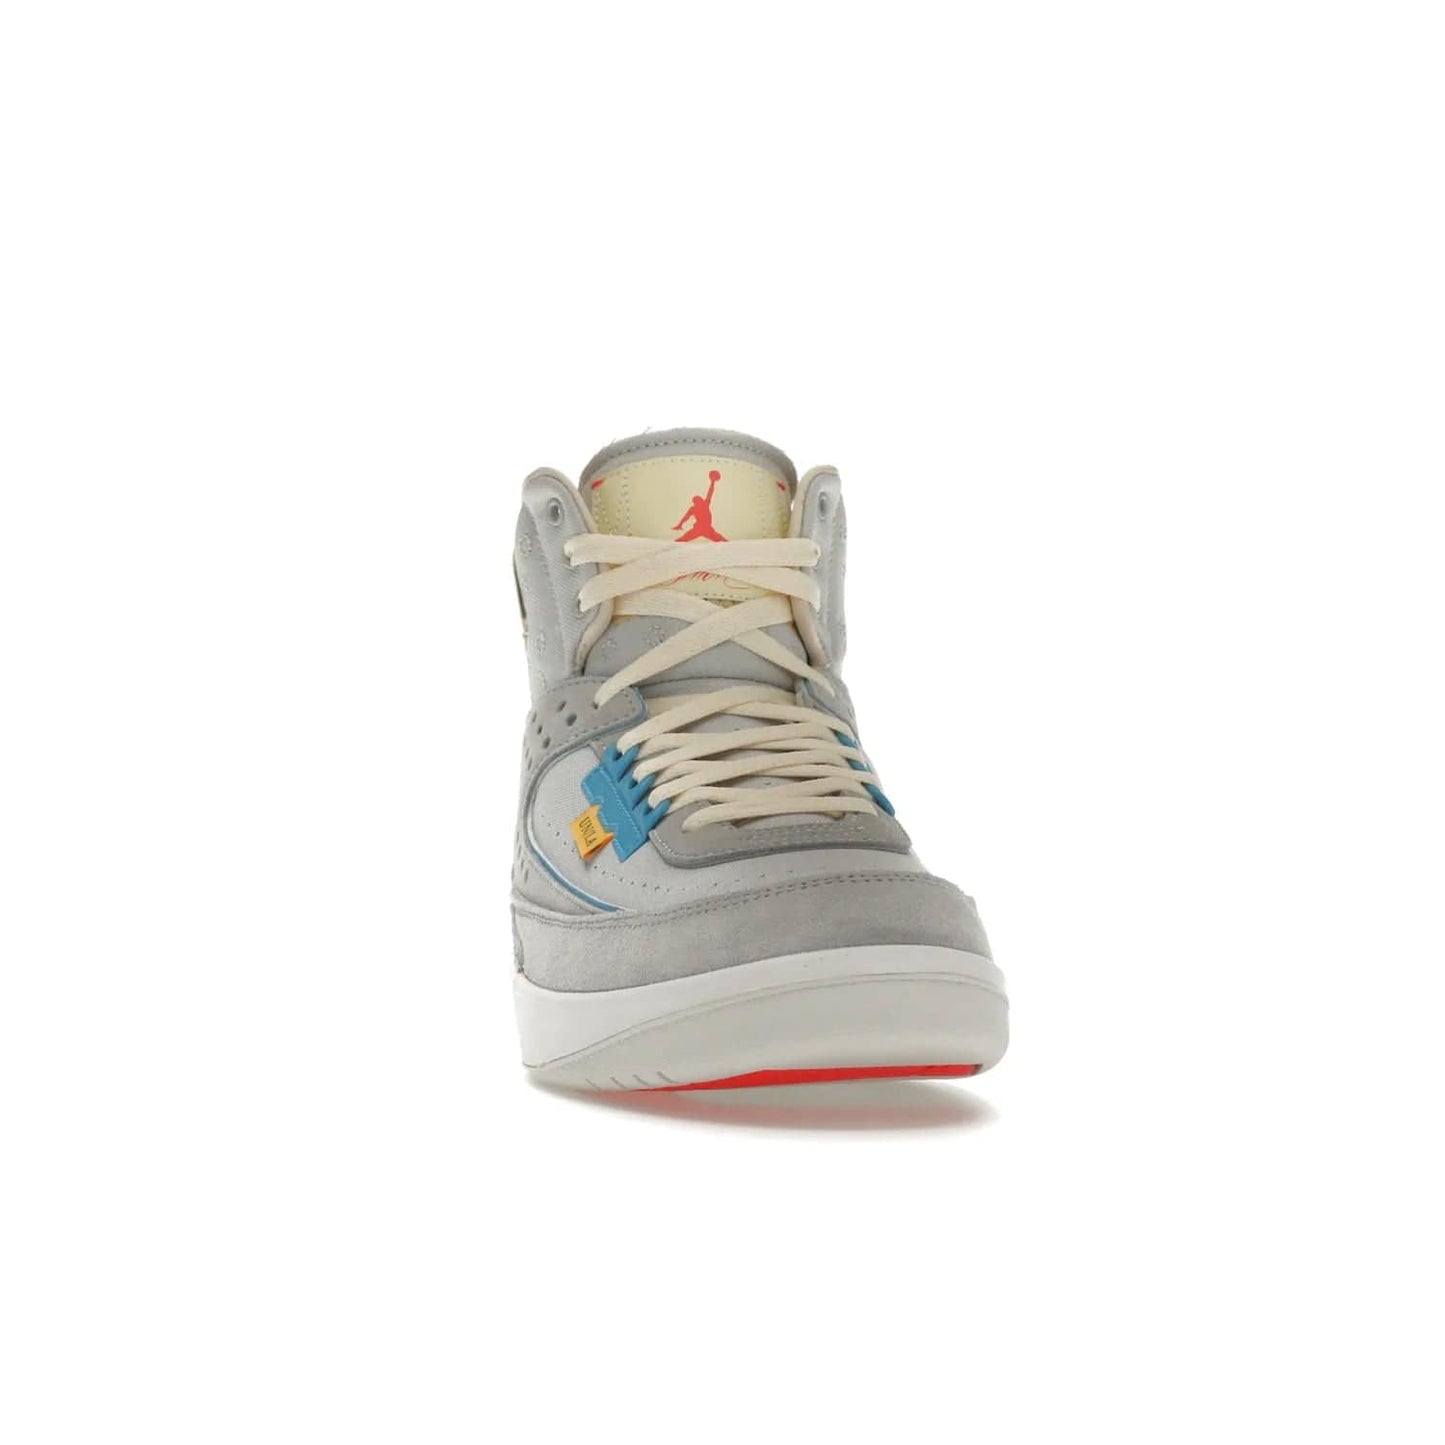 Jordan 2 Retro SP Union Grey Fog - Image 9 - Only at www.BallersClubKickz.com - Introducing the Air Jordan 2 Retro SP Union Grey Fog. This intricate sneaker design features a grey canvas upper with light blue eyelets, eyestay patches, and piping, plus custom external tags. Dropping in April 2022, this exclusive release offers a worn-in look and feel.